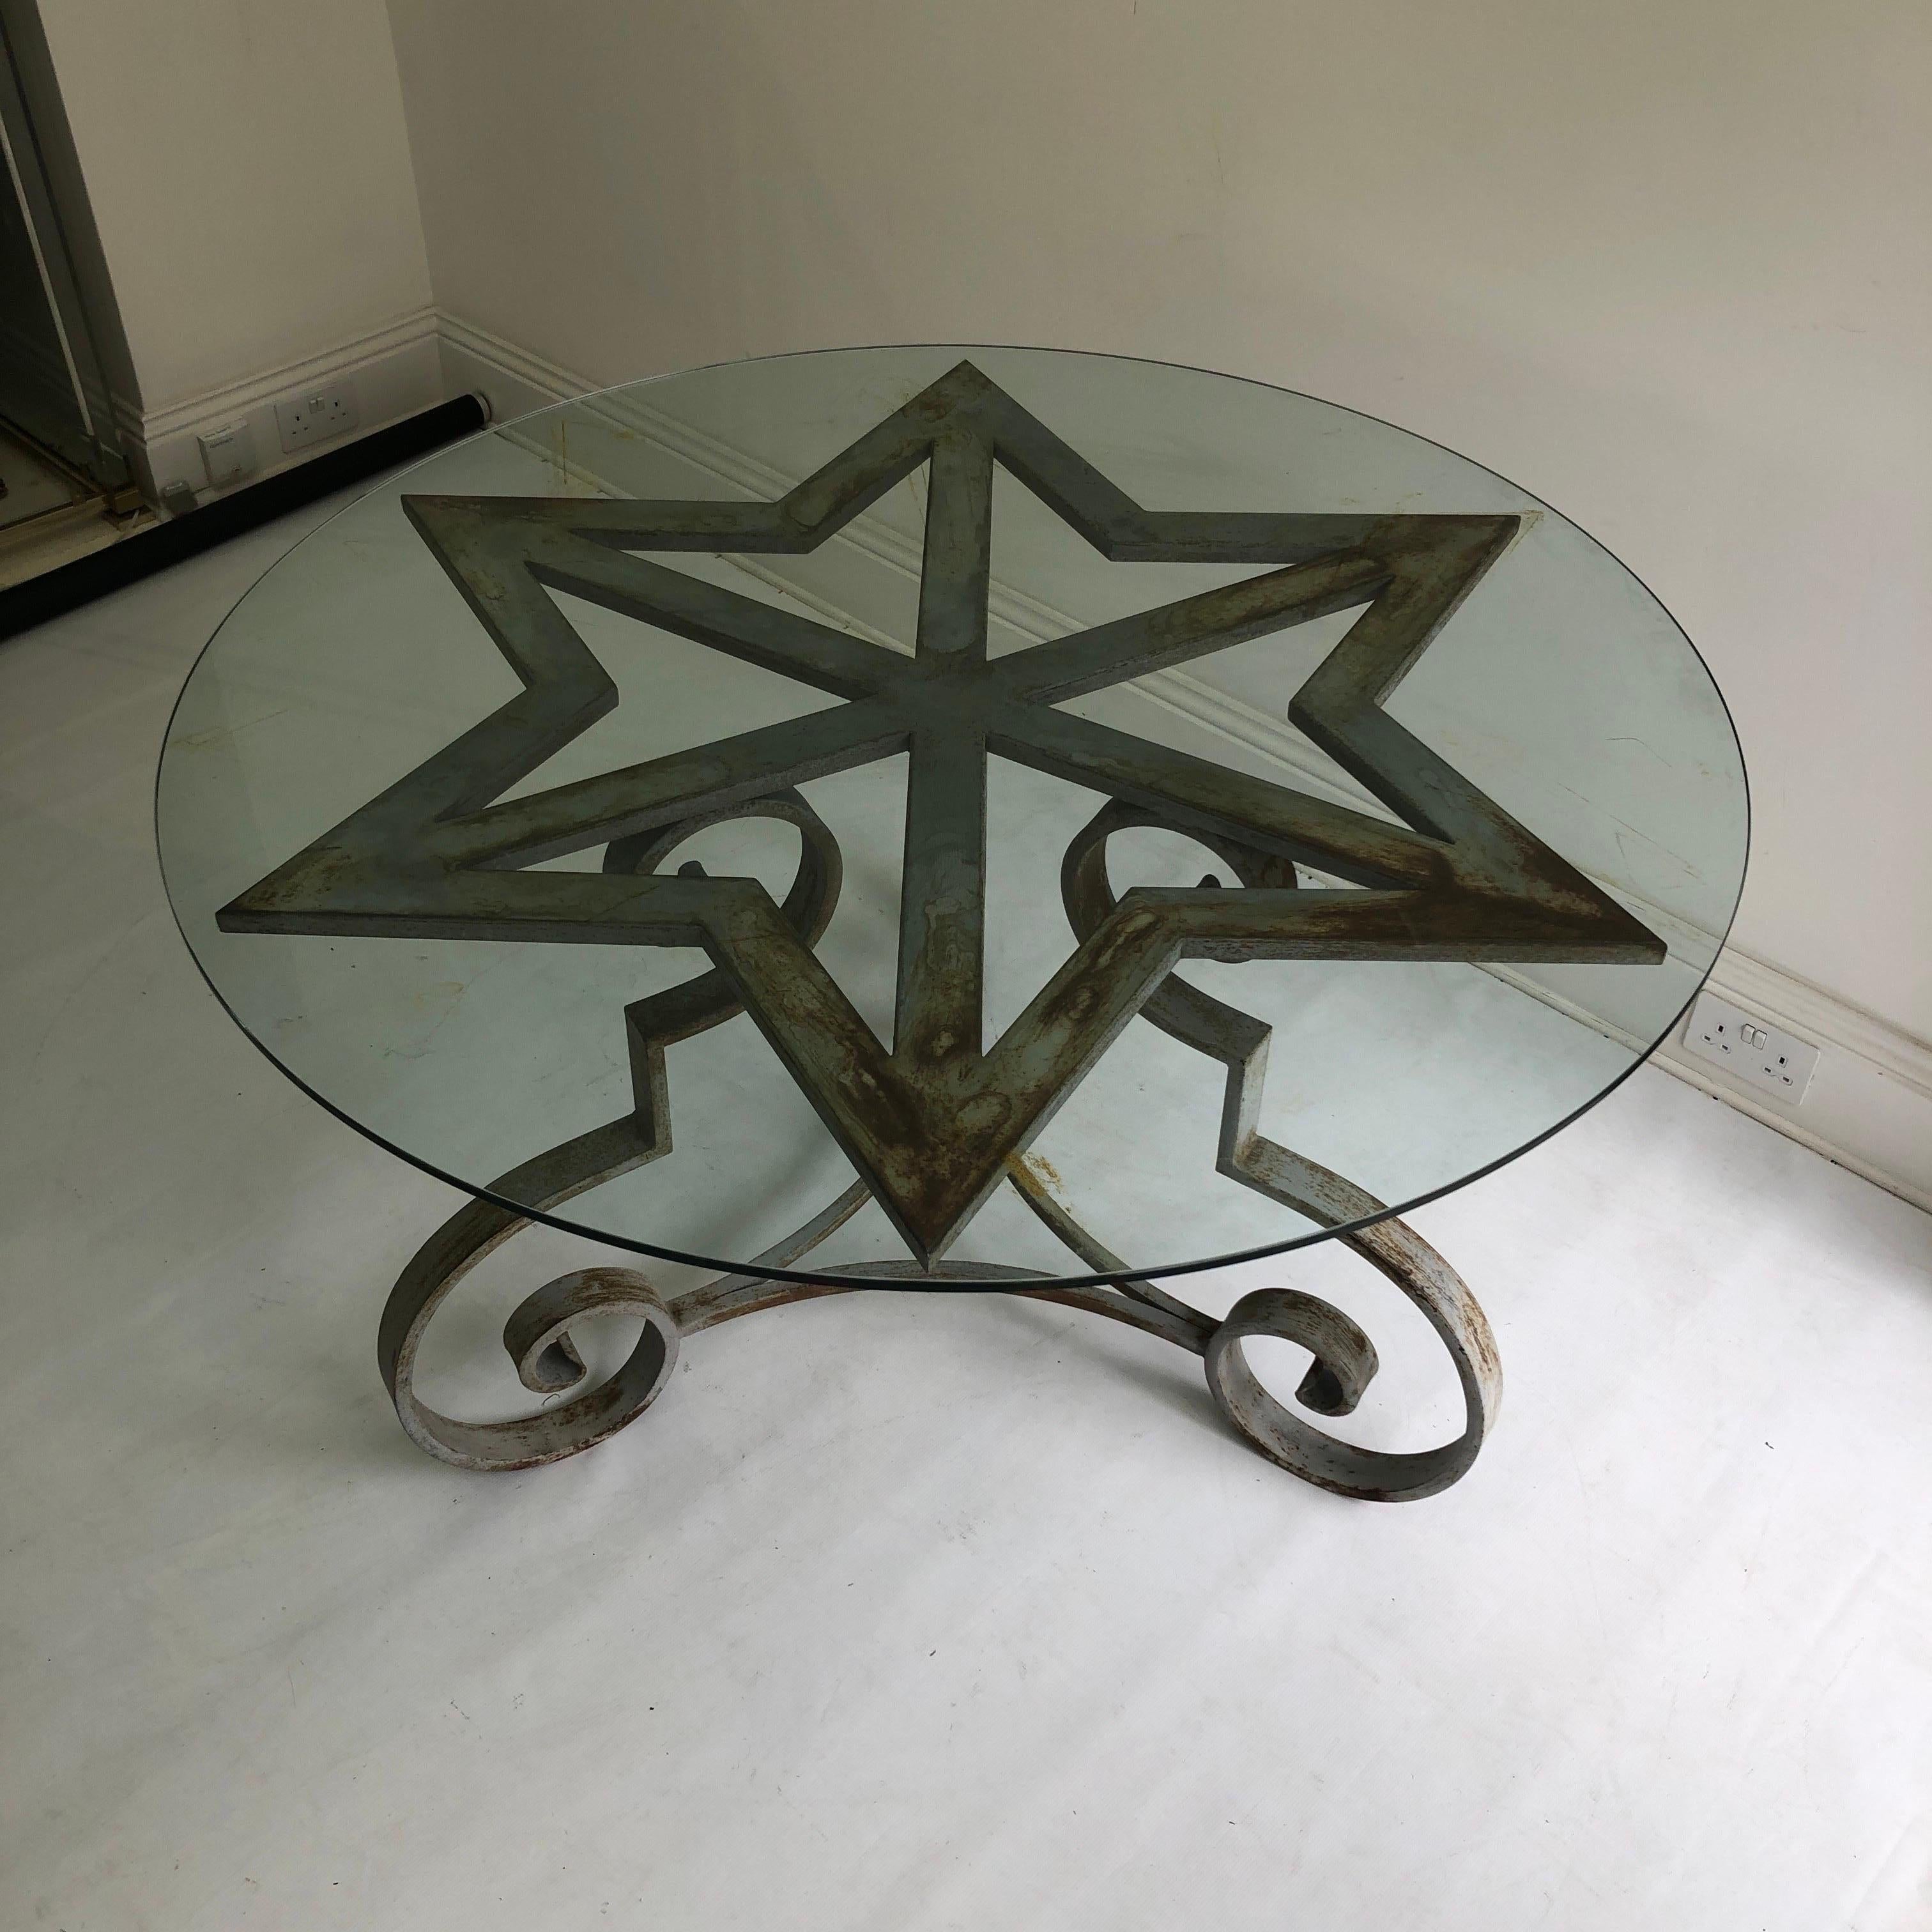 Post-Modern Garden Glass Star Shaped Cast Iron Round Dining Table 1970s French Antique 60s For Sale